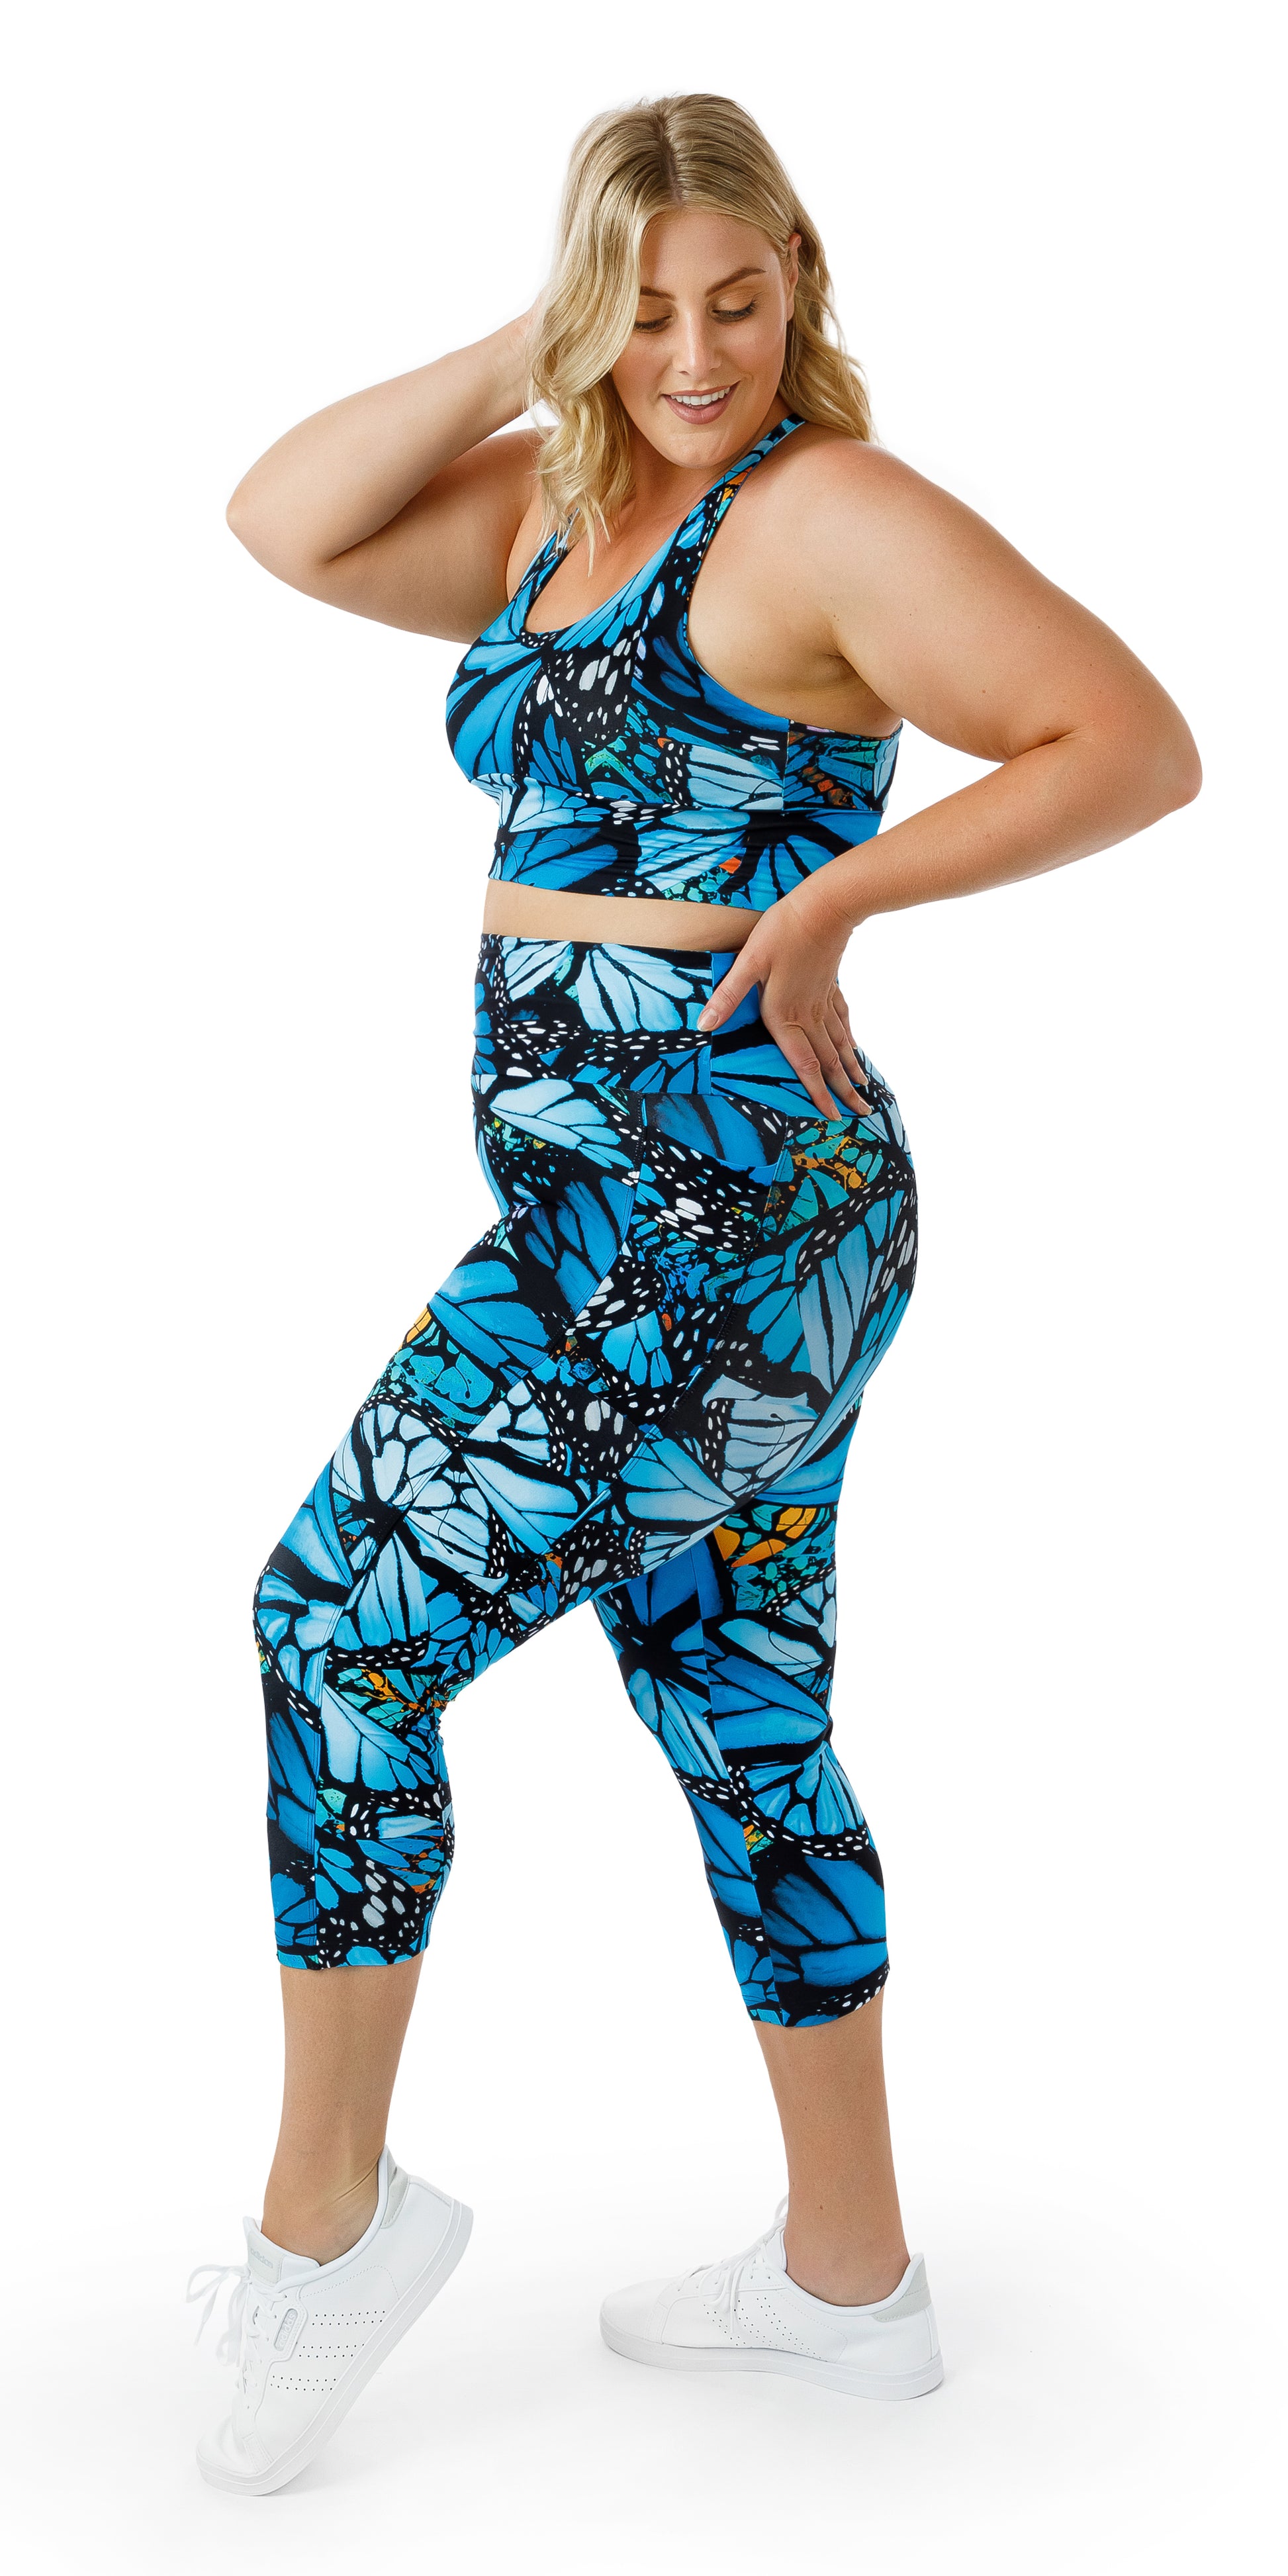 Full body side view of girl in blue animal print JH Butterfly Eco Capri Leggings with Pockets and matching bra putting one hand on her head and the other on her waist